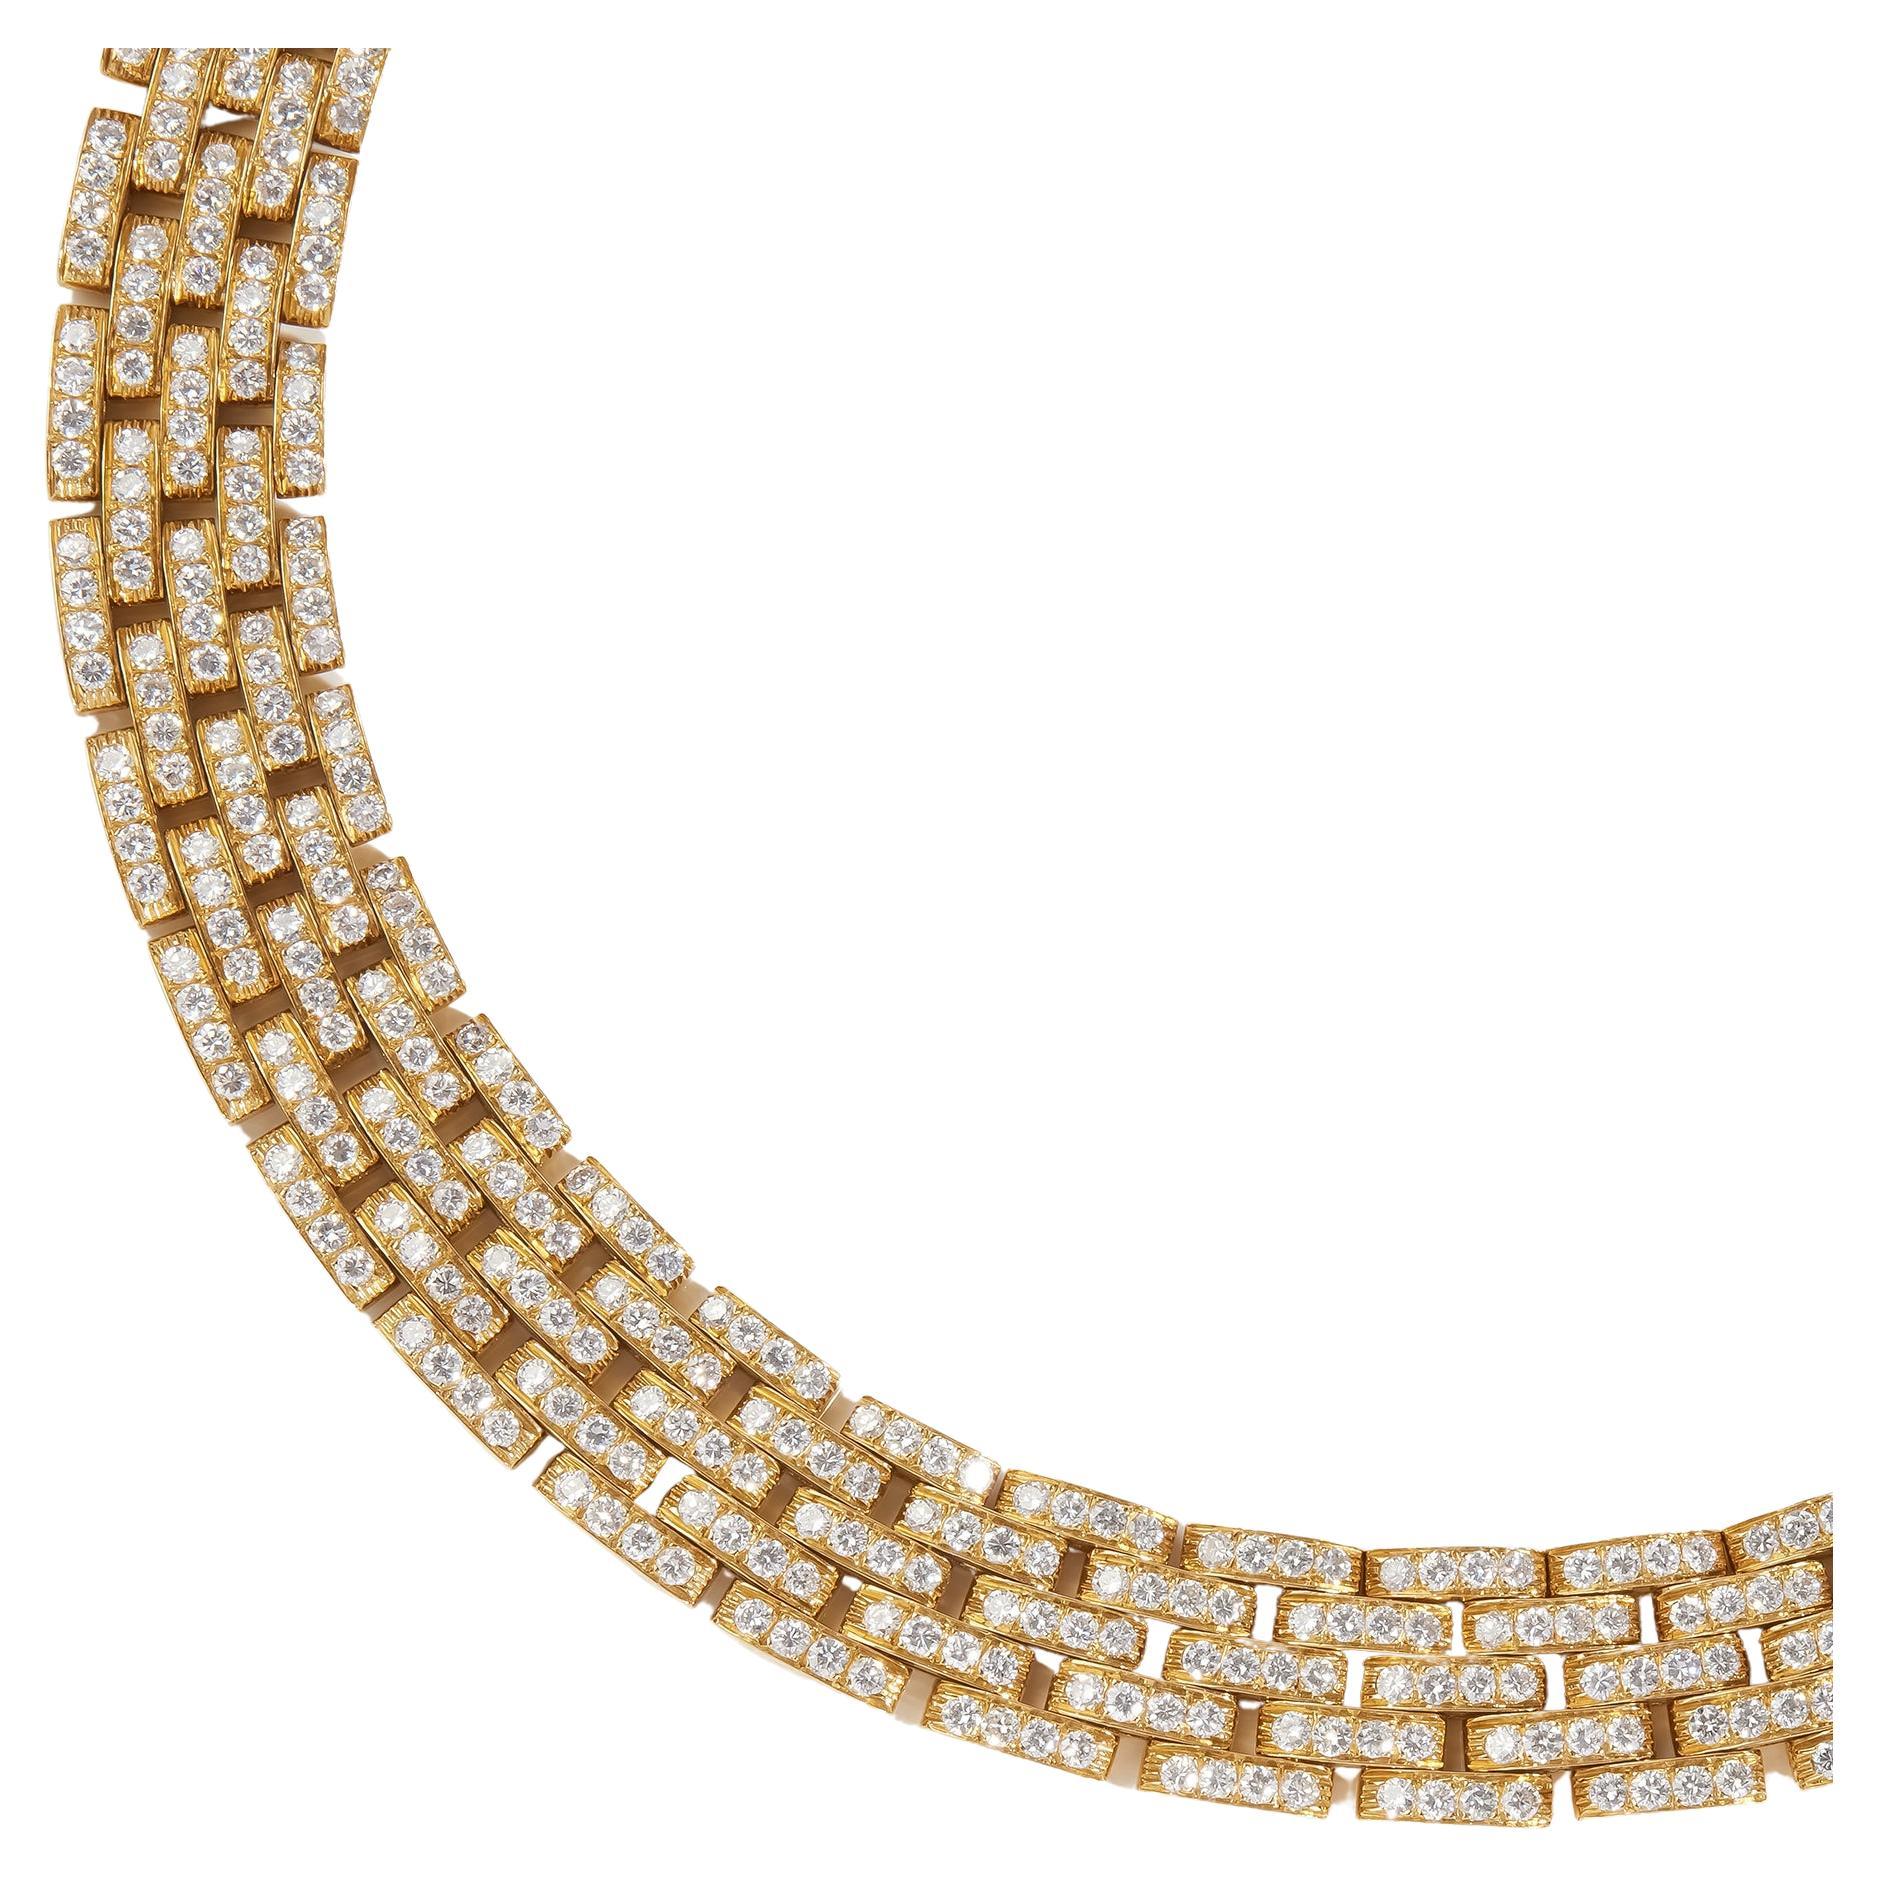 Cartier Maillon Panthere 5 Row Diamond Paved Necklace